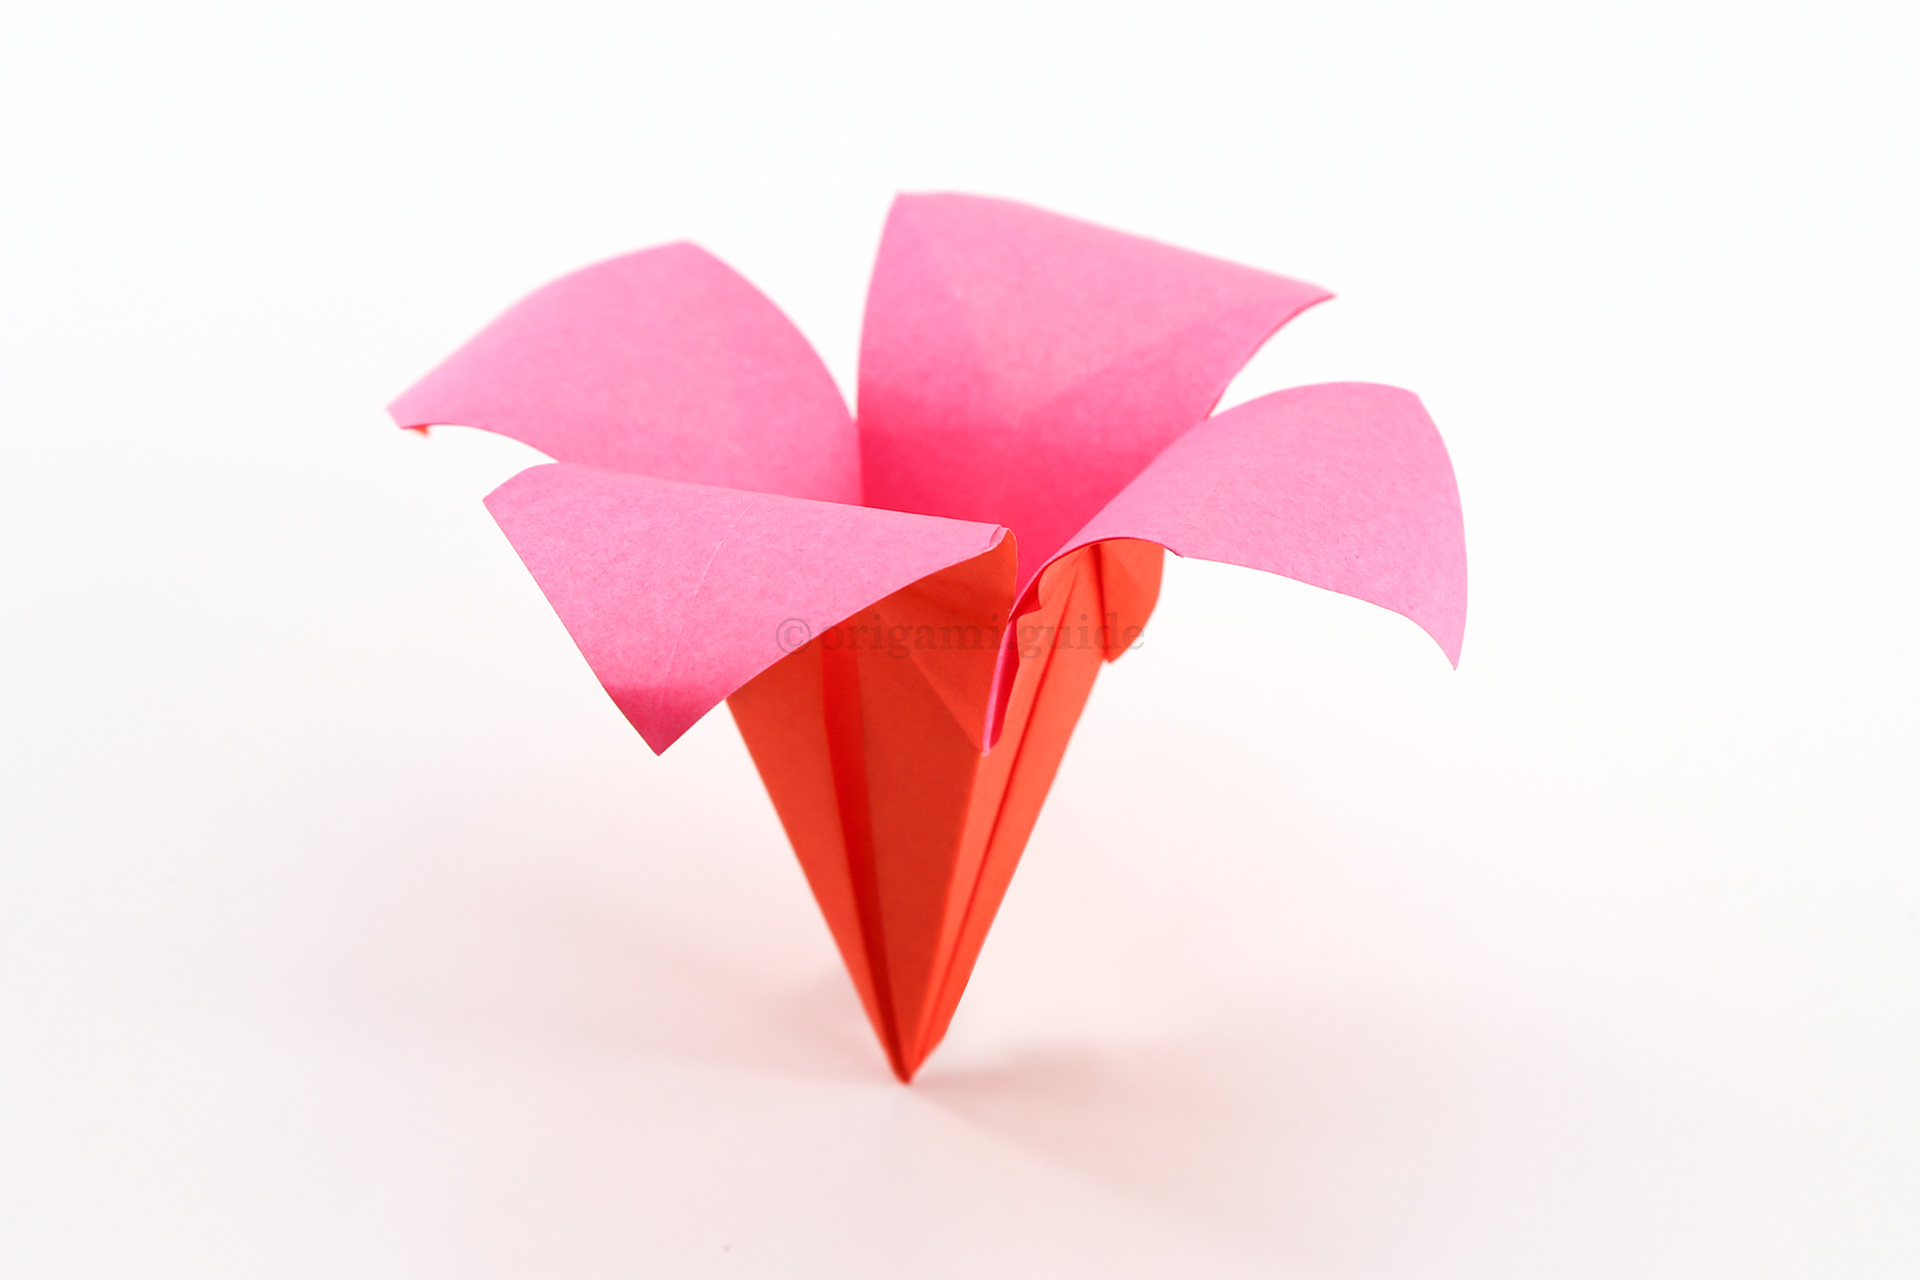 You can use a pen to curl the petals over, or you can make a bold looking flower by folding the petals back.